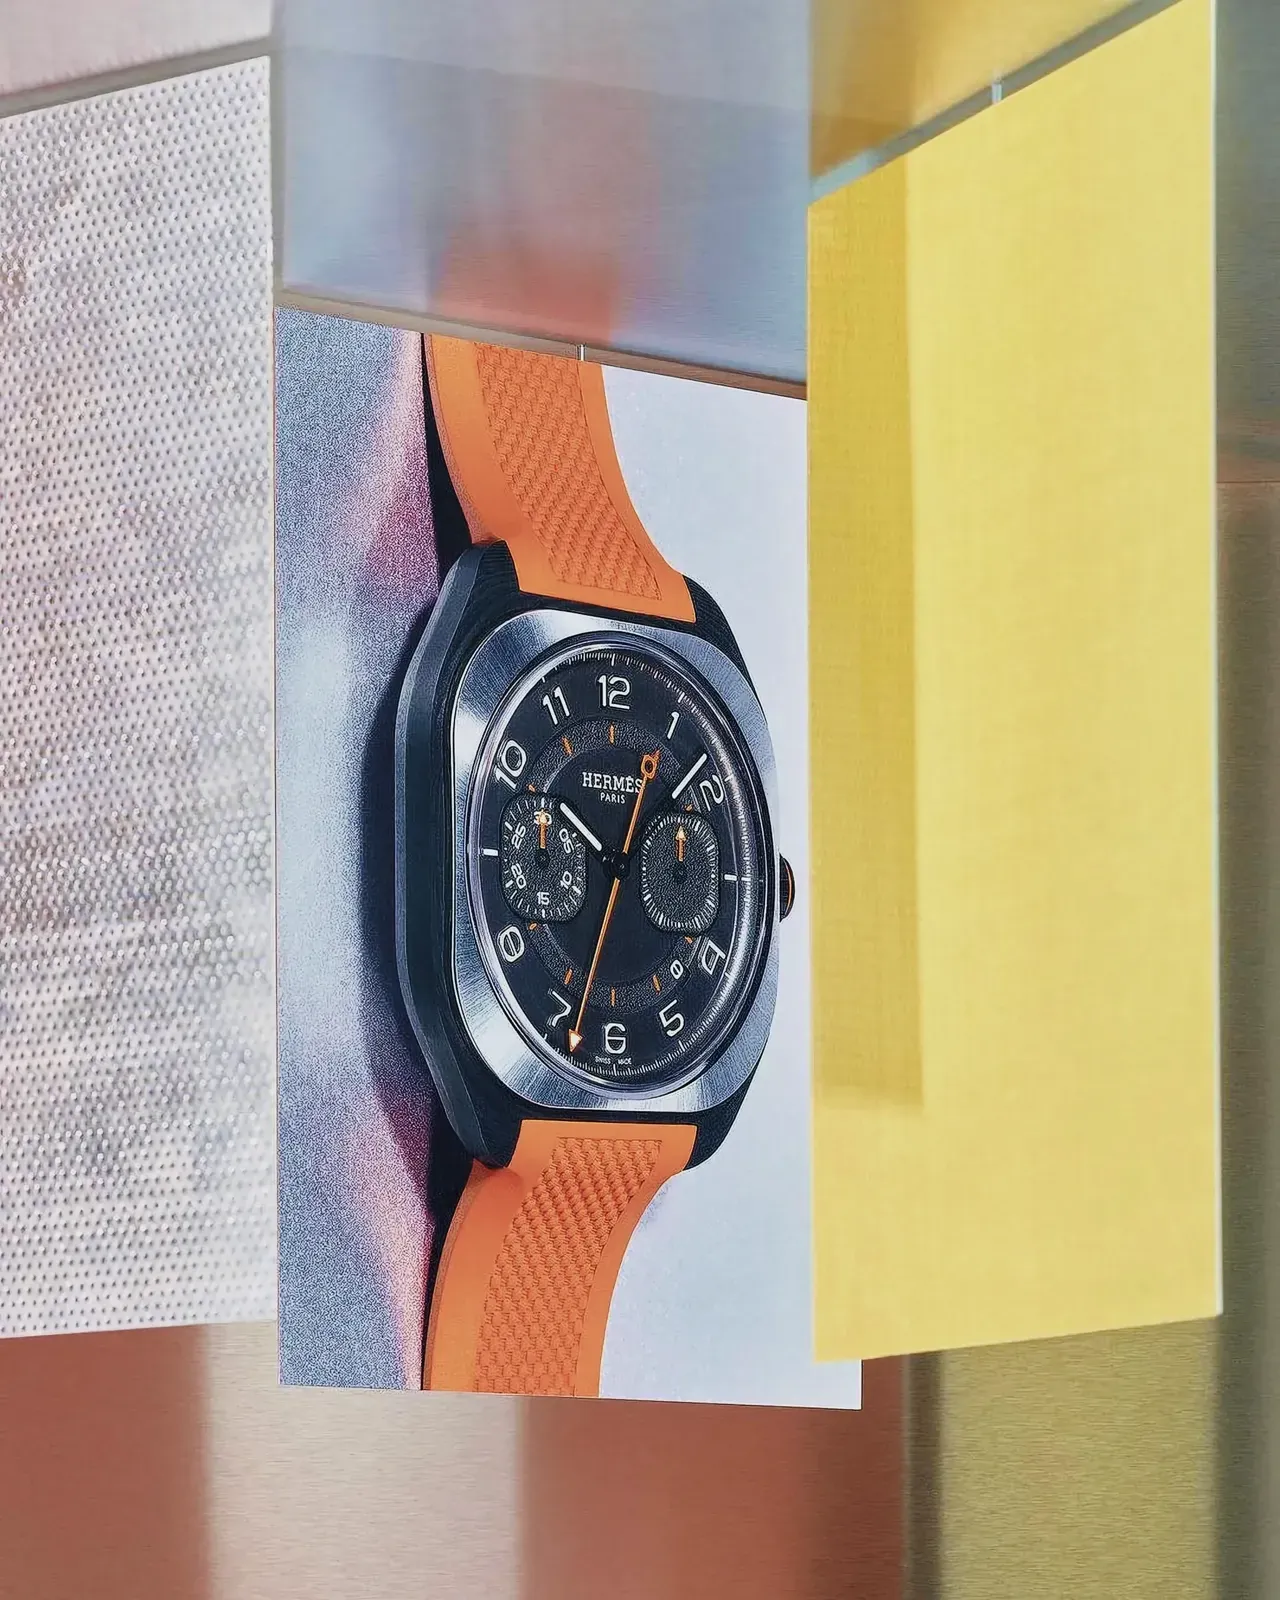 Analog watch on display with yellow wall in the background